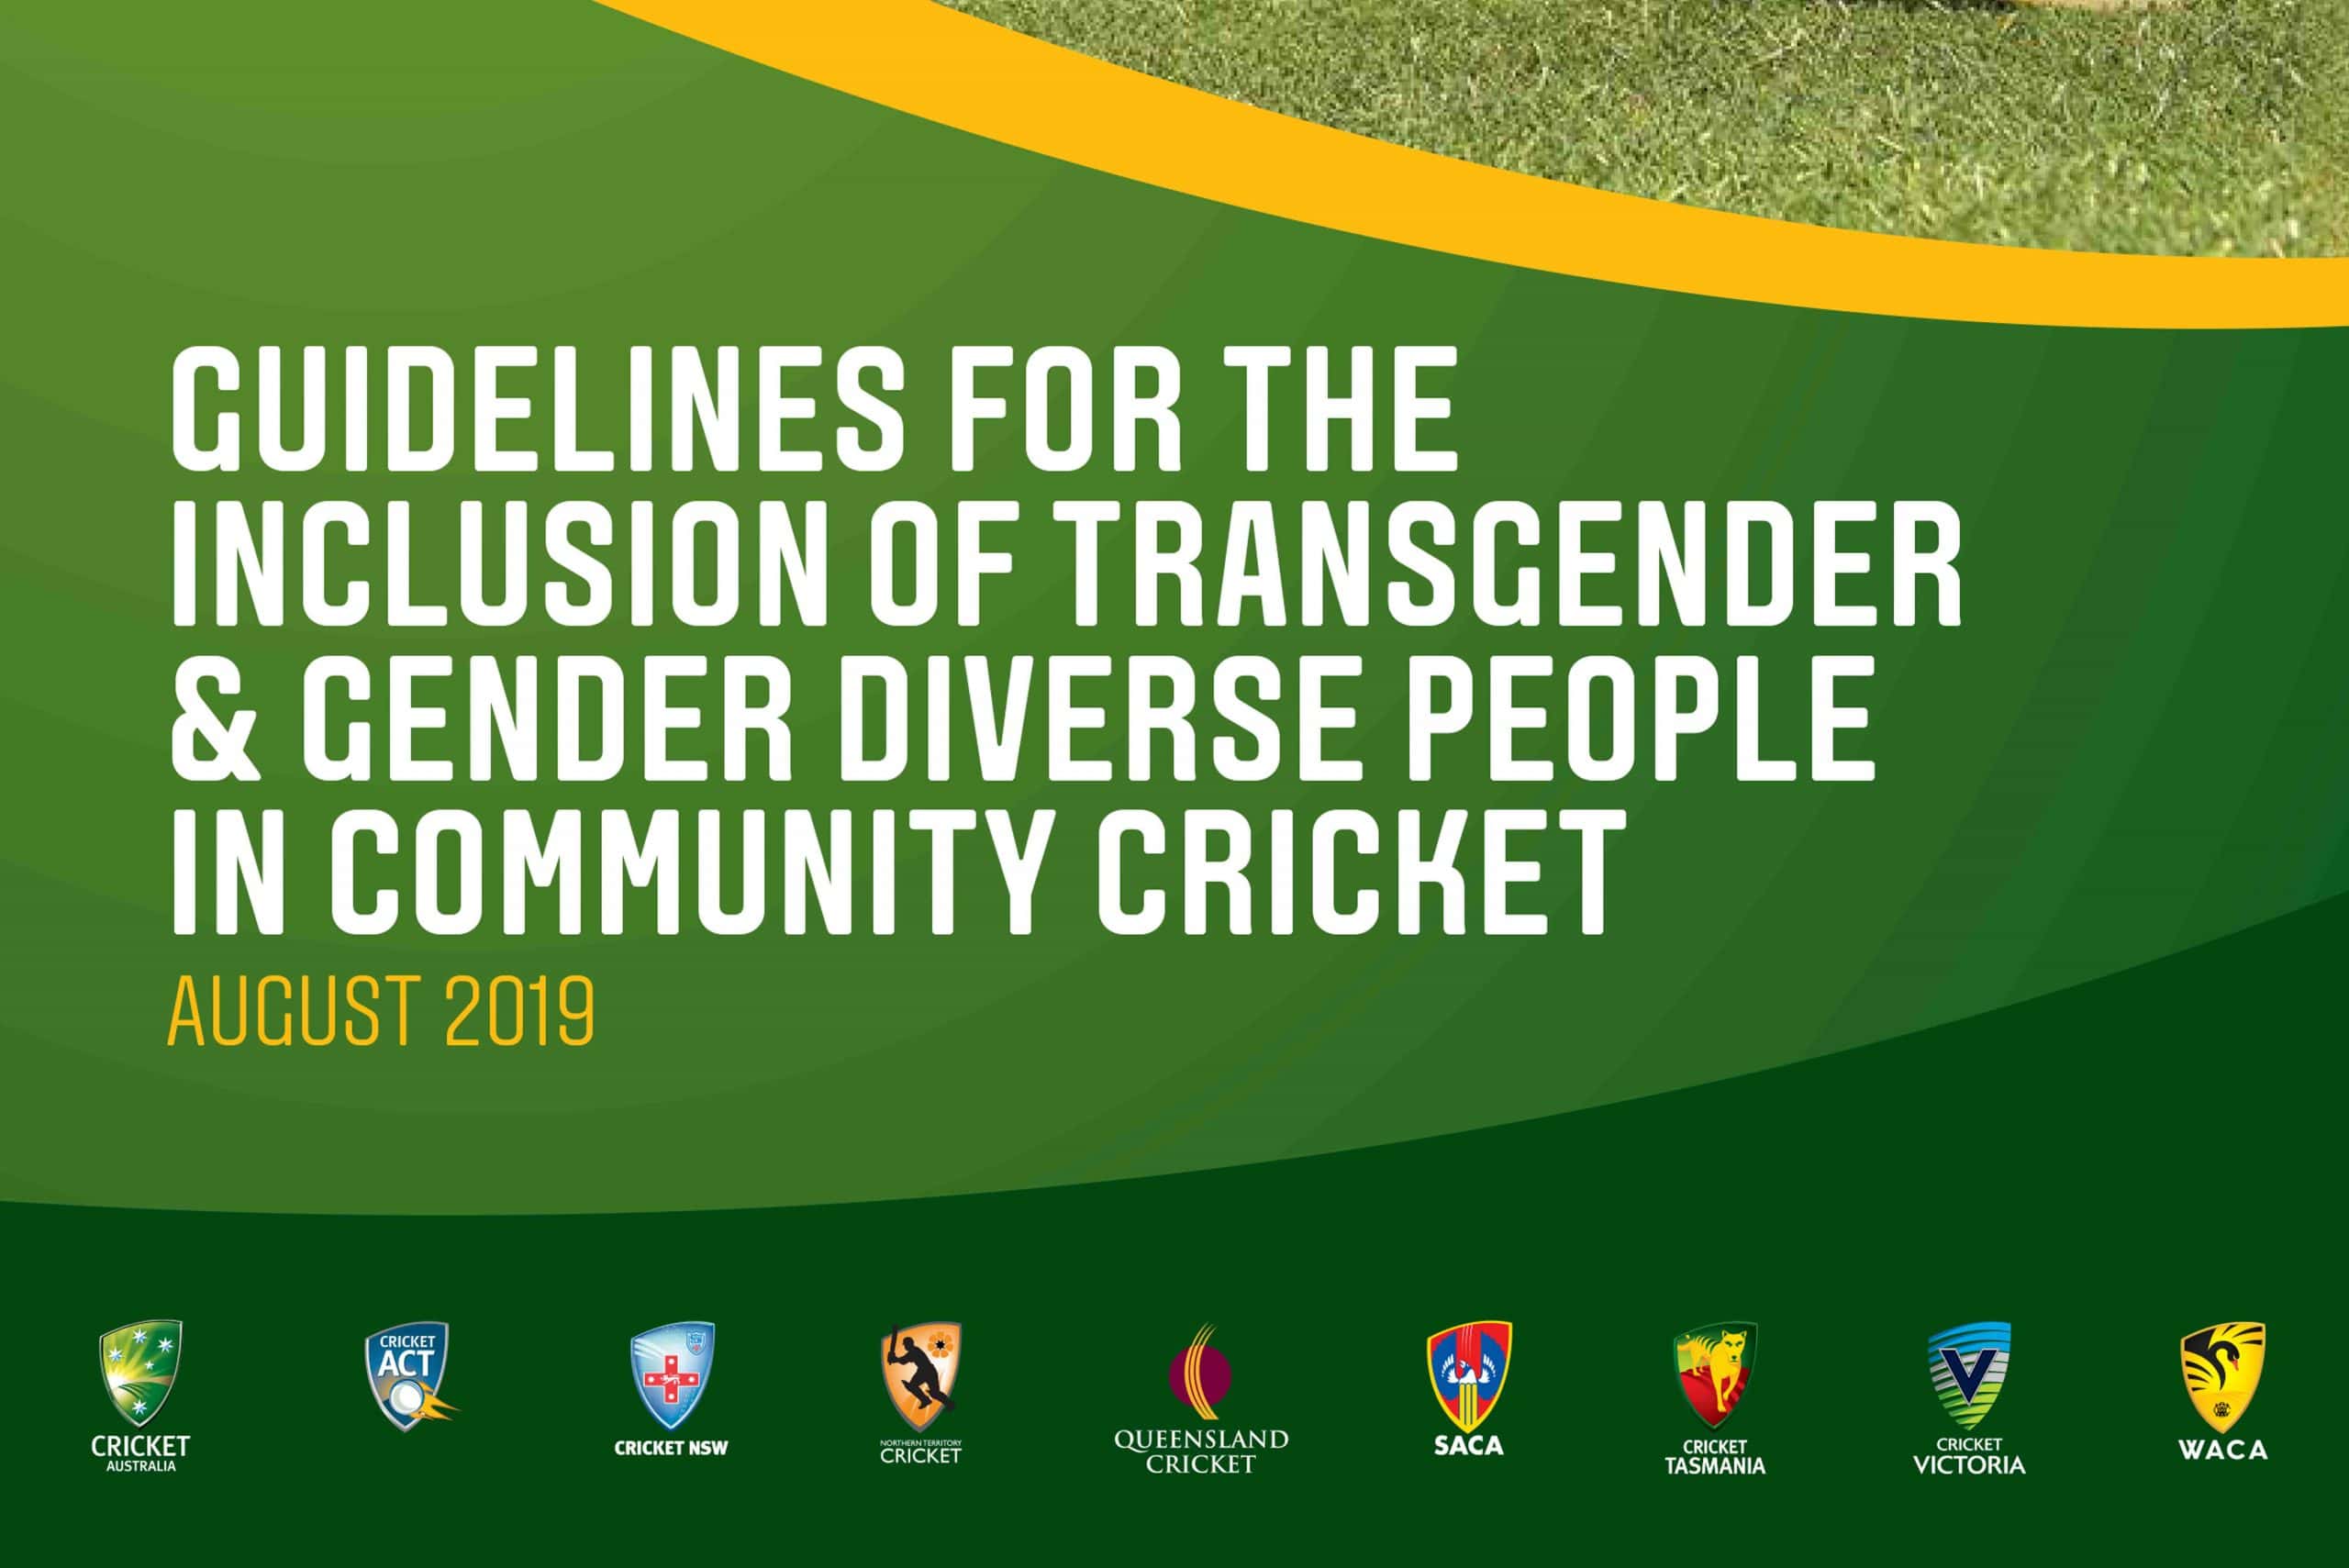 Image has green back ground with white text that readss Guidelines for the inclusion of Transgender and Gender Diverse people in community cricket August 2019. Logos for each of the State cricket organisations appear at the bottom of image.